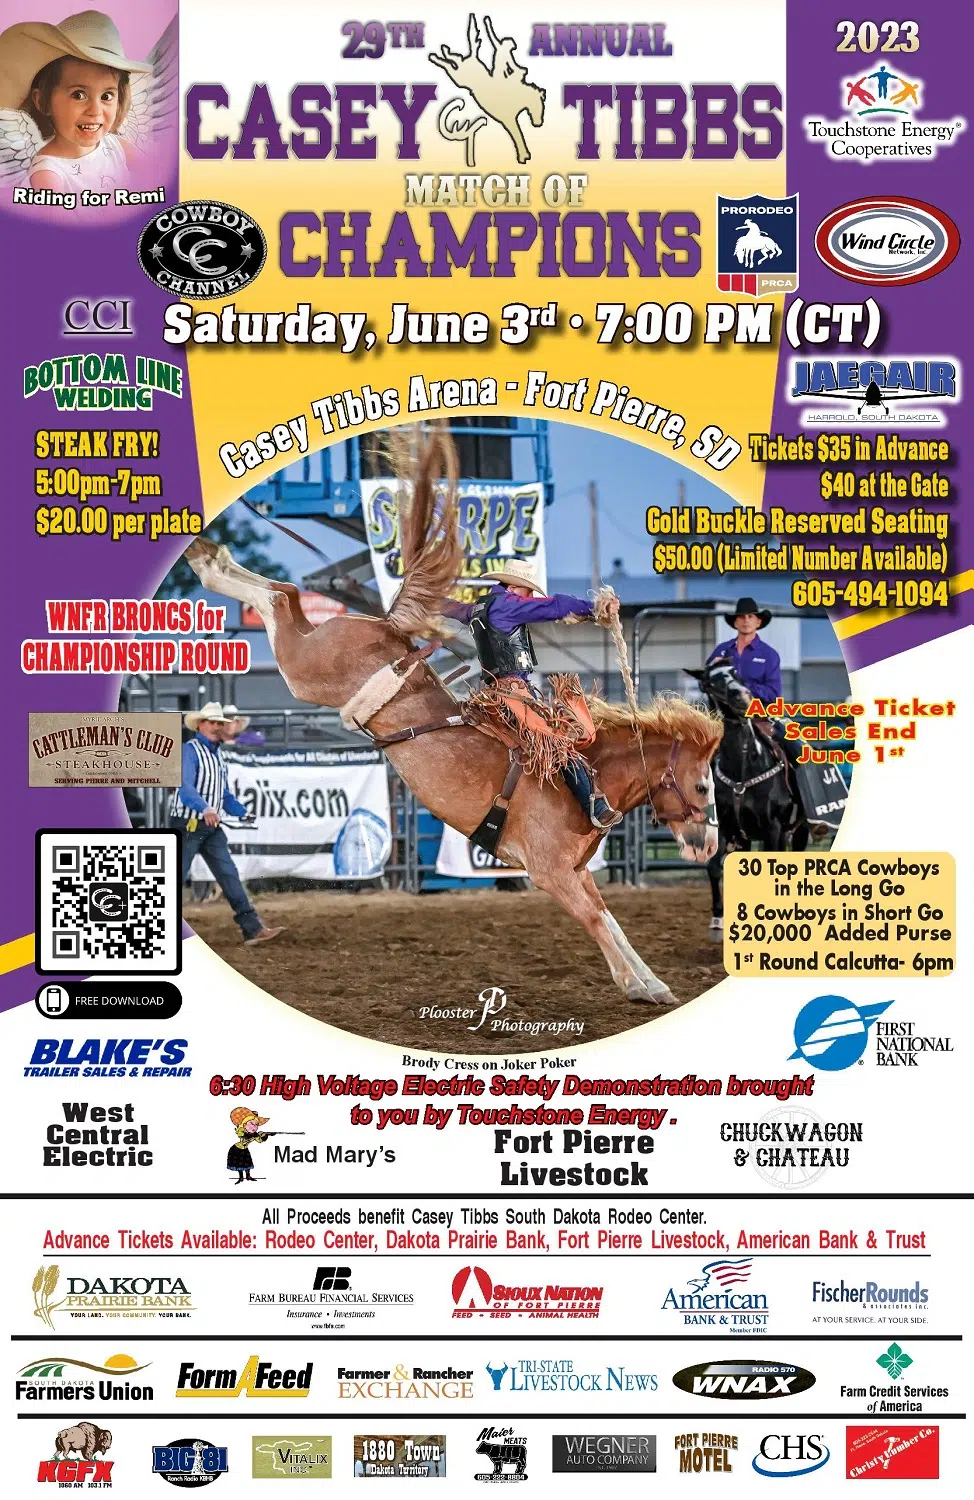 Casey Tibbs Match of Champions once again bringing PRCA sanctioned